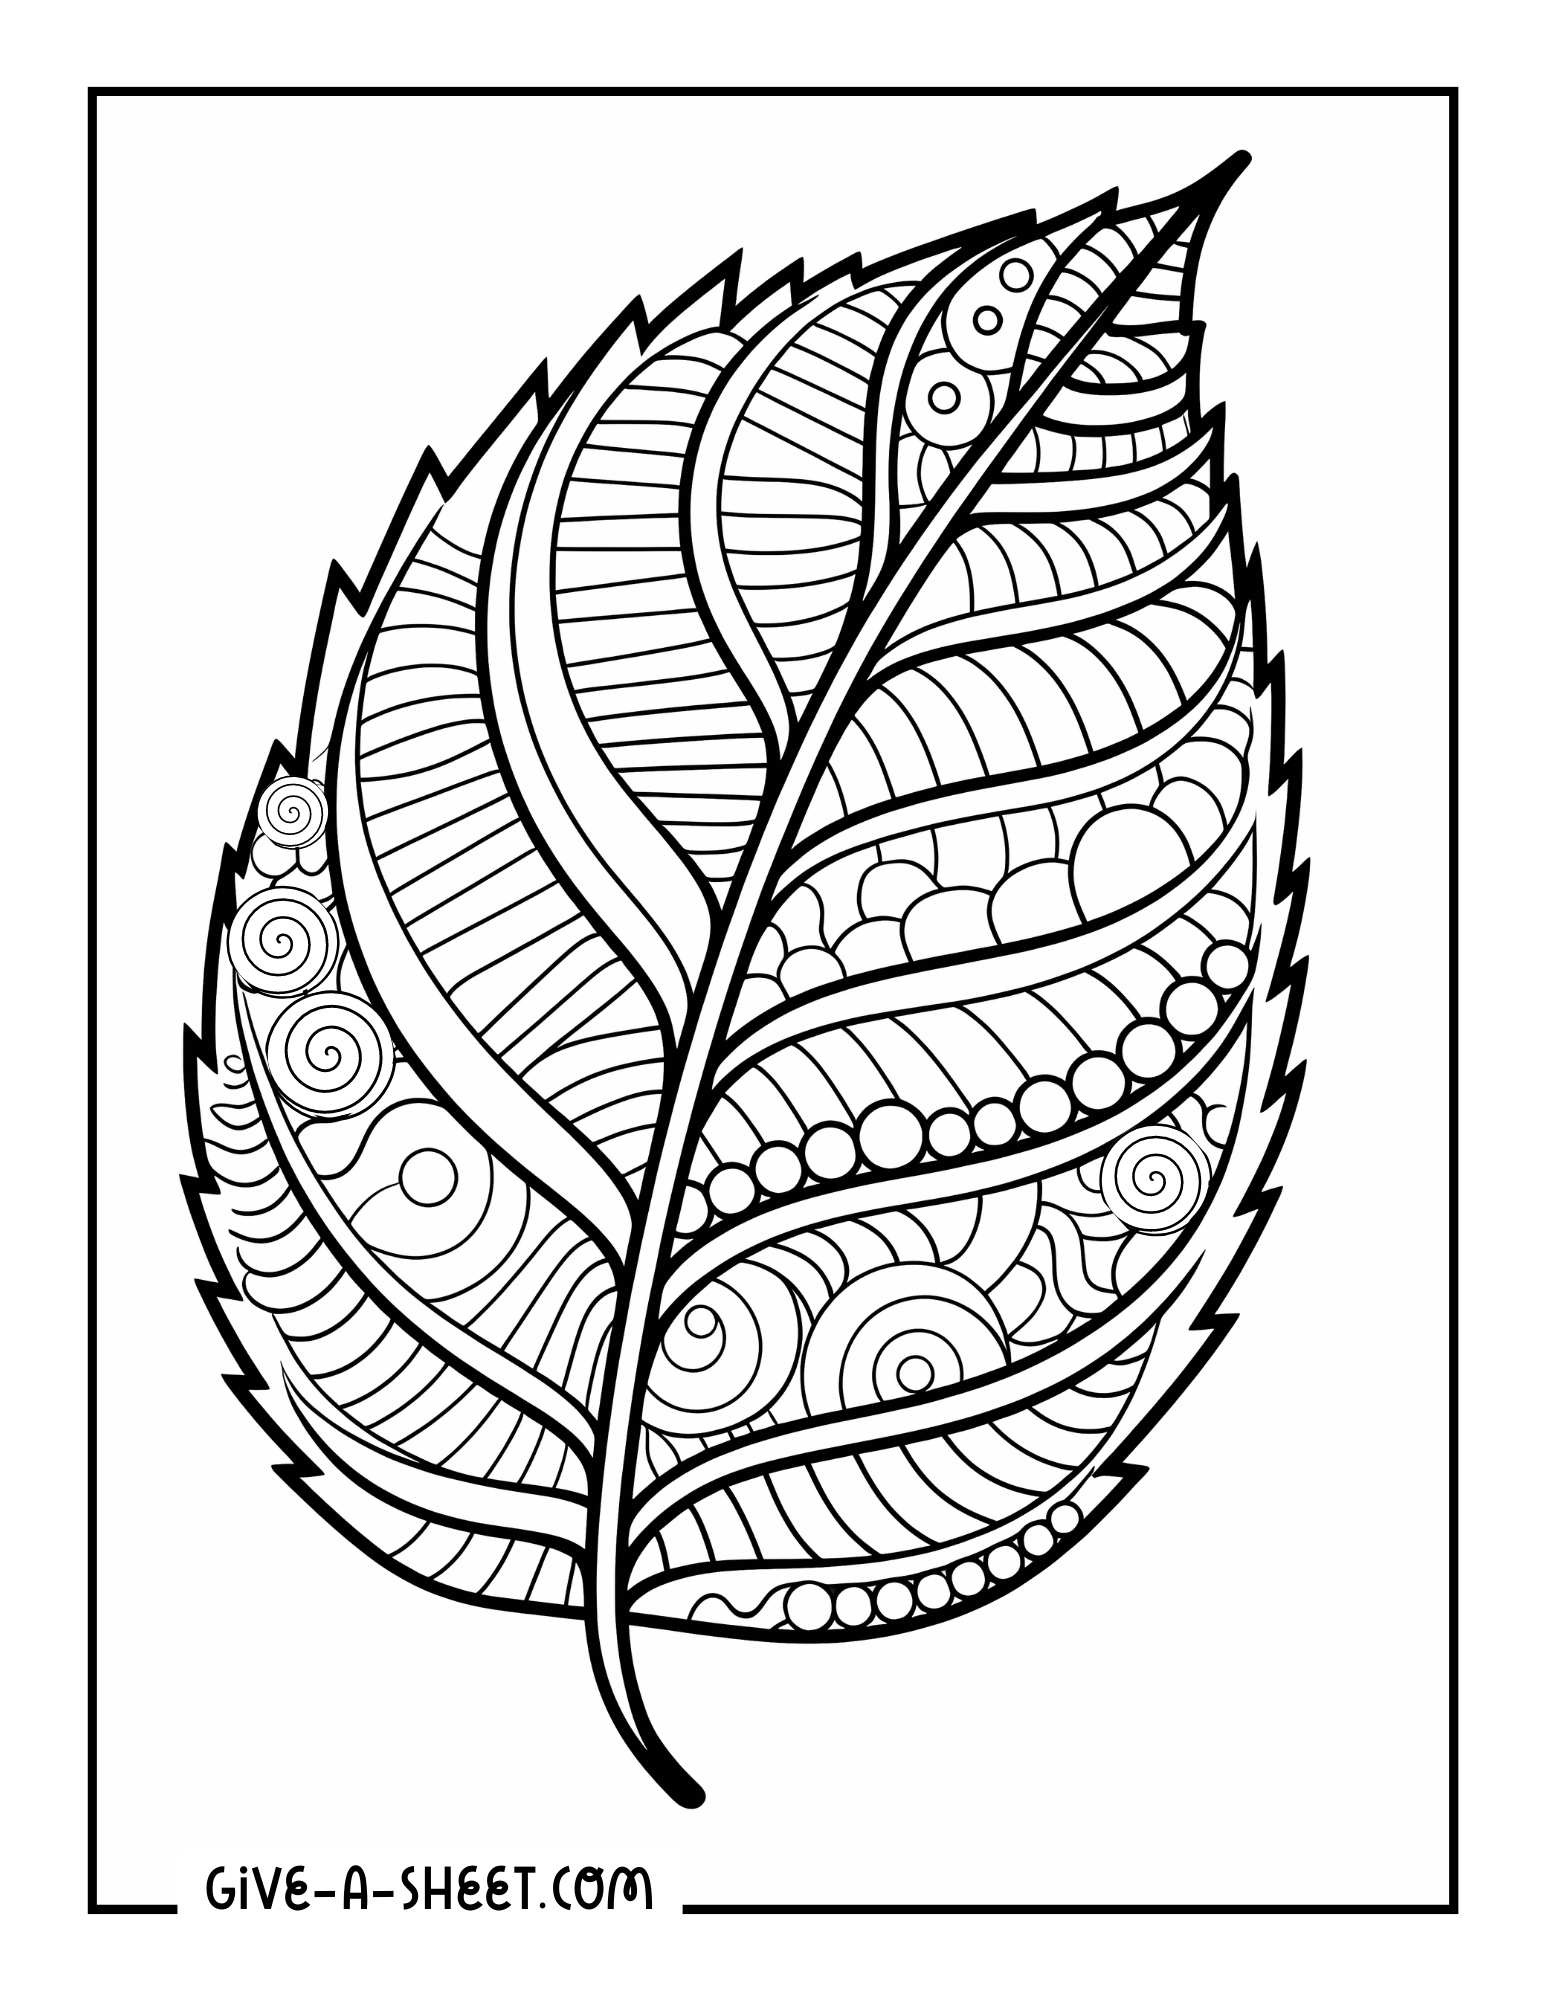 Leaf coloring sheets with intricate details to color.